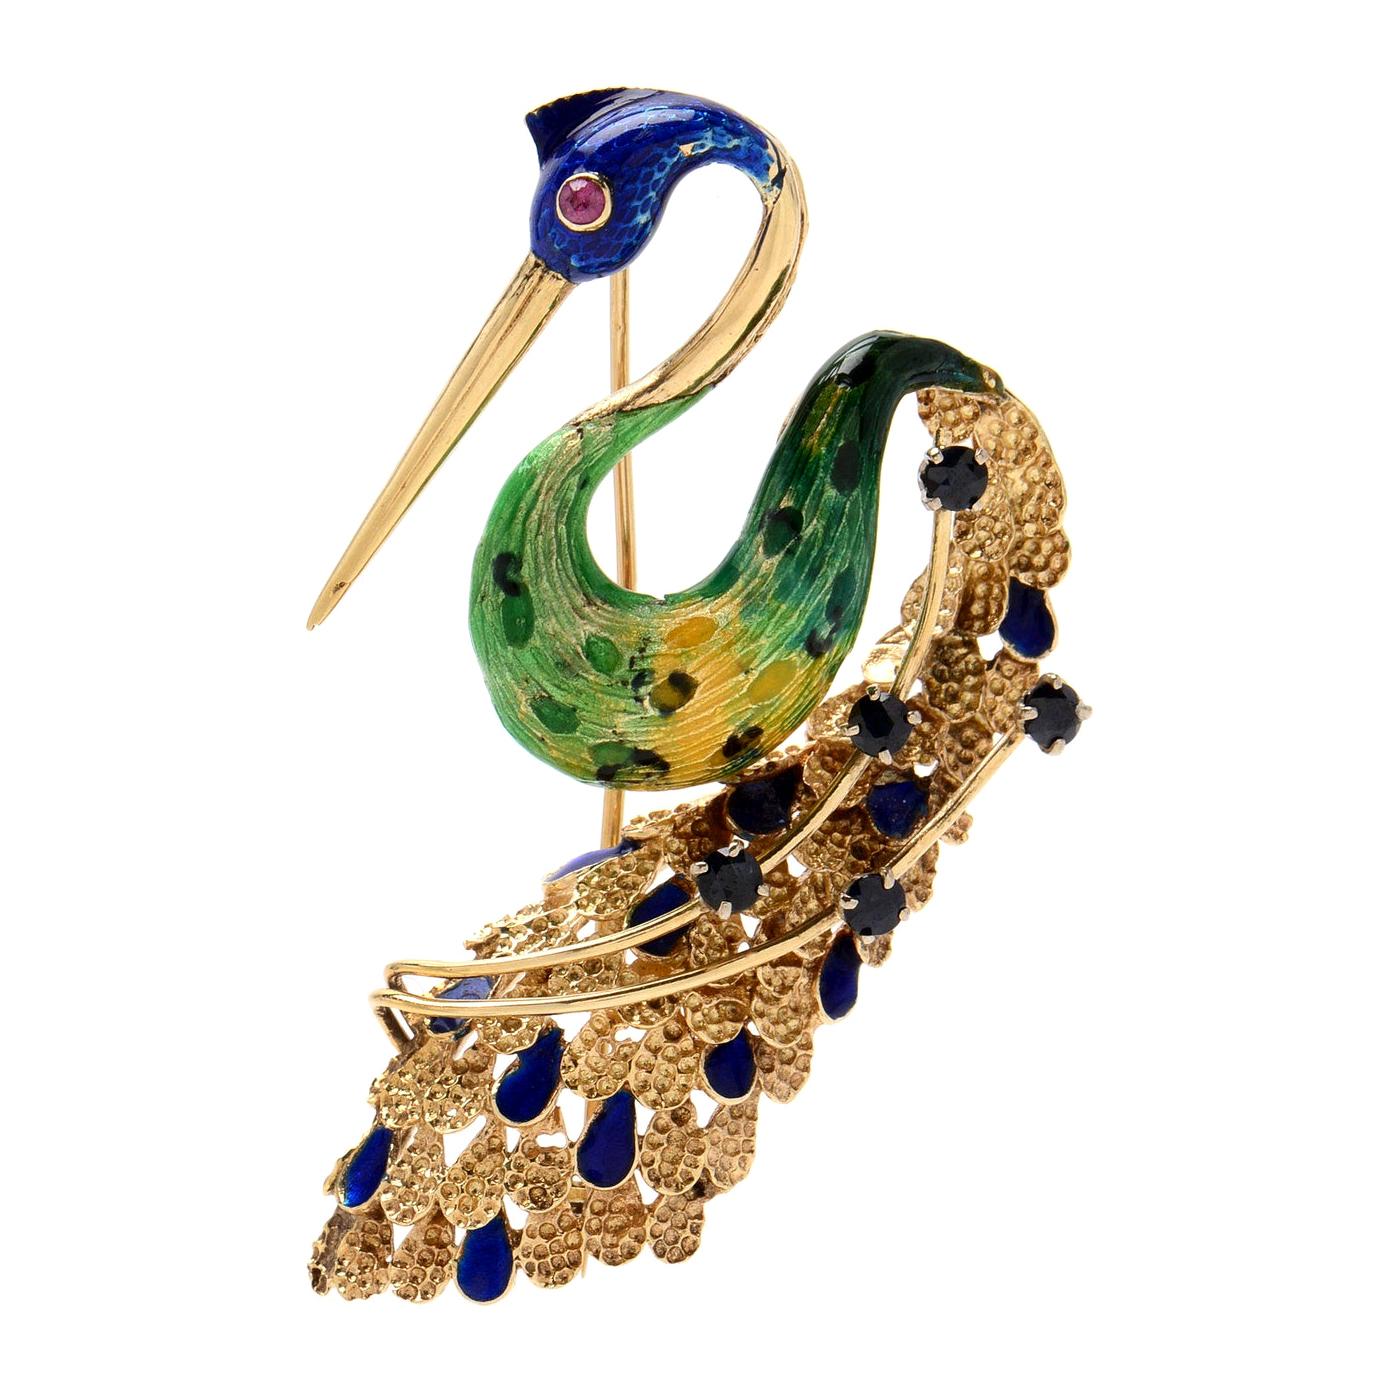 Ornate Retro Enamel Peacock Bird Brooch Ruby and Sapphire Accents, circa 1970s